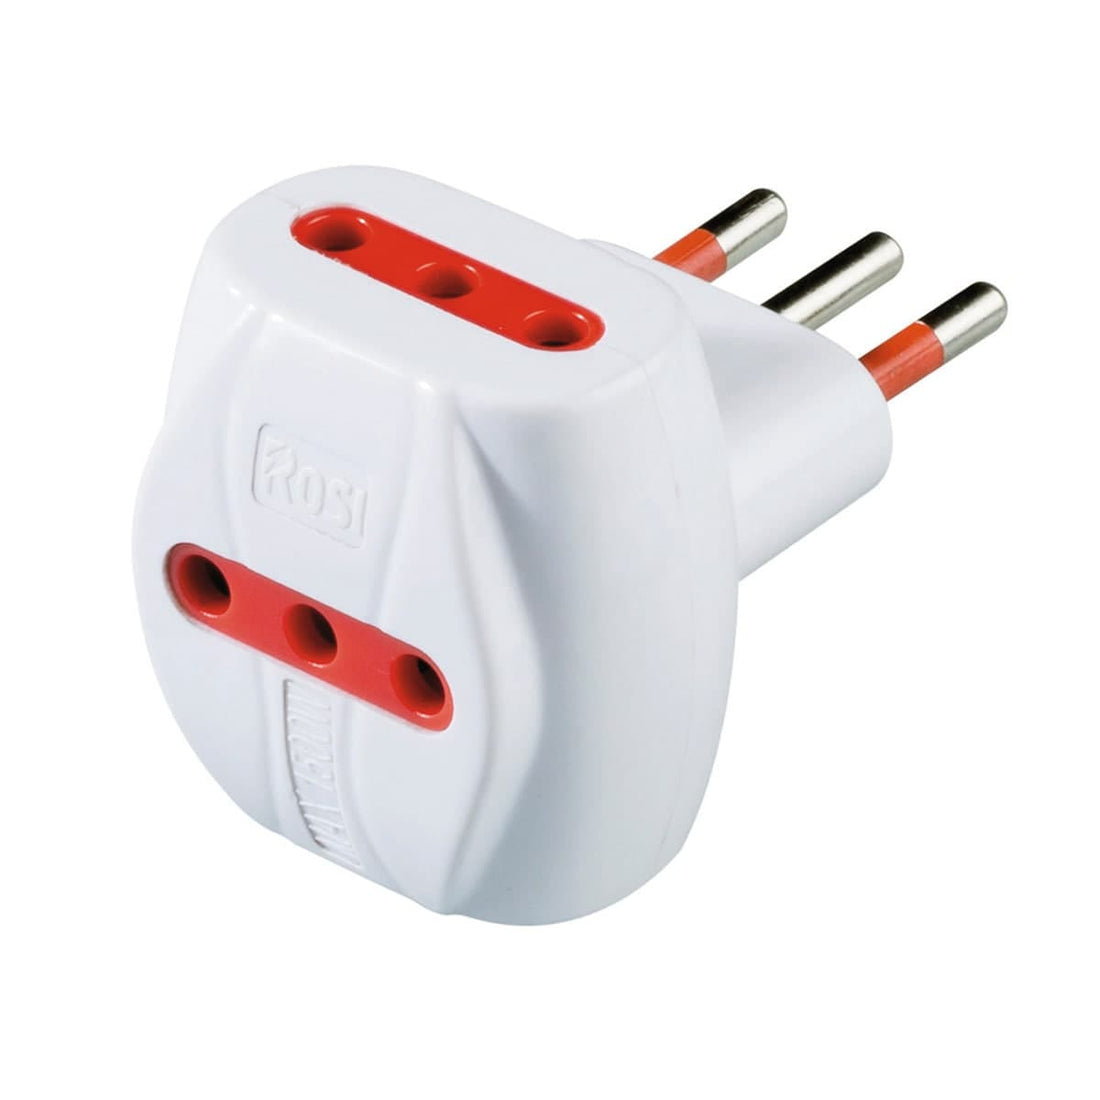 ADAPTER PLUG 10A 3 SOCKETS 10/16A WITH SELF-RESETTING LIMITER WHITE - best price from Maltashopper.com BR420002472